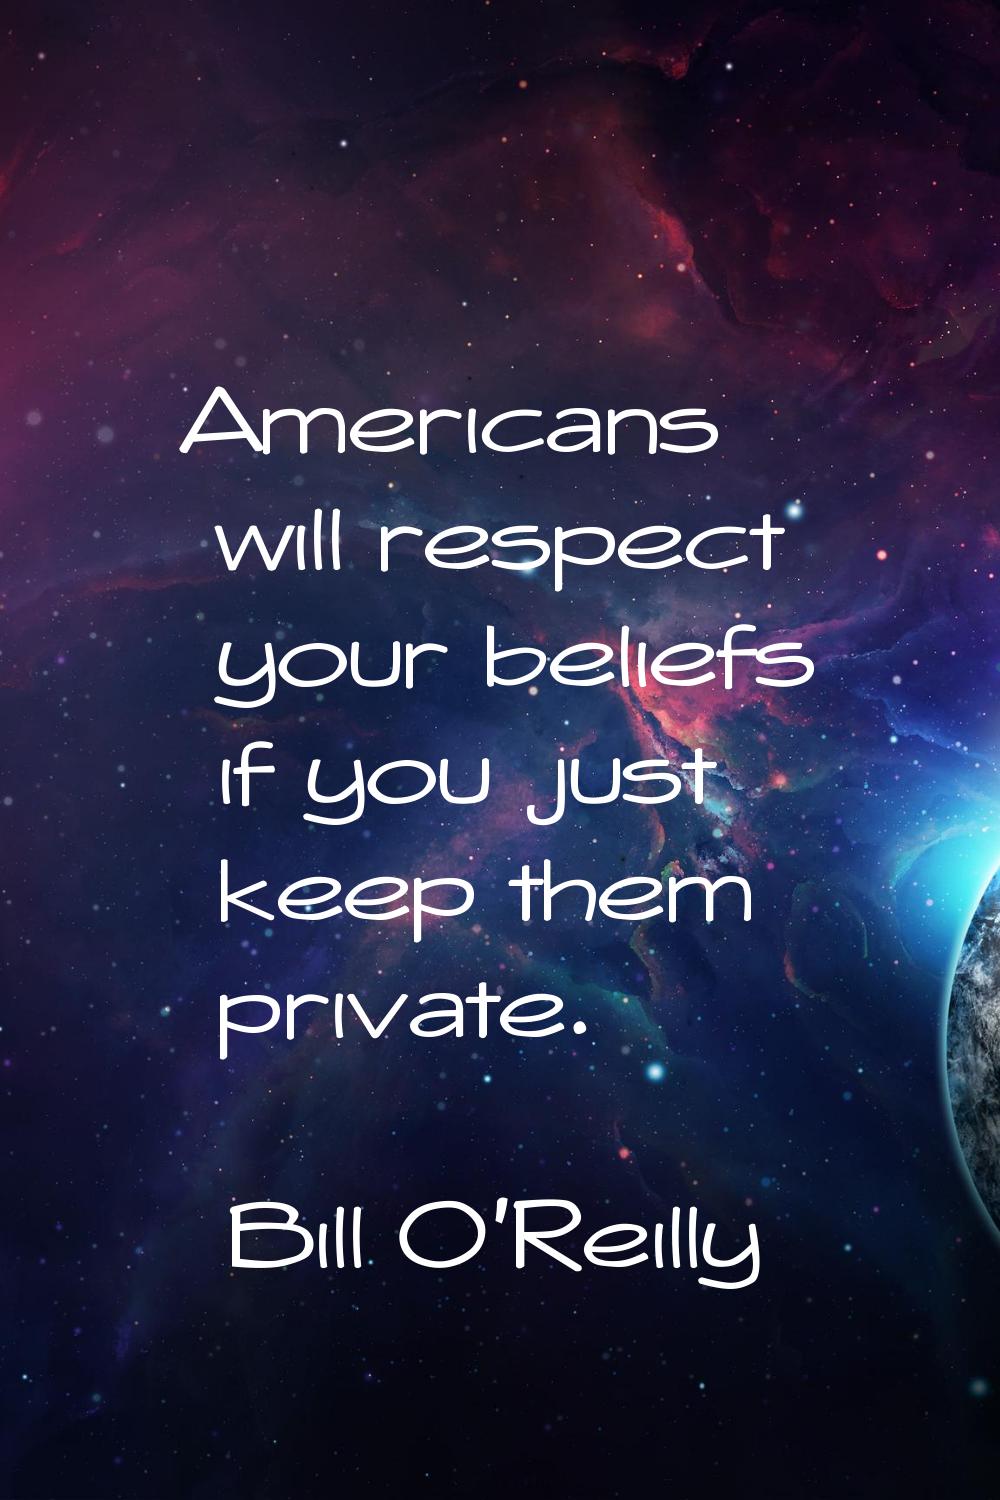 Americans will respect your beliefs if you just keep them private.